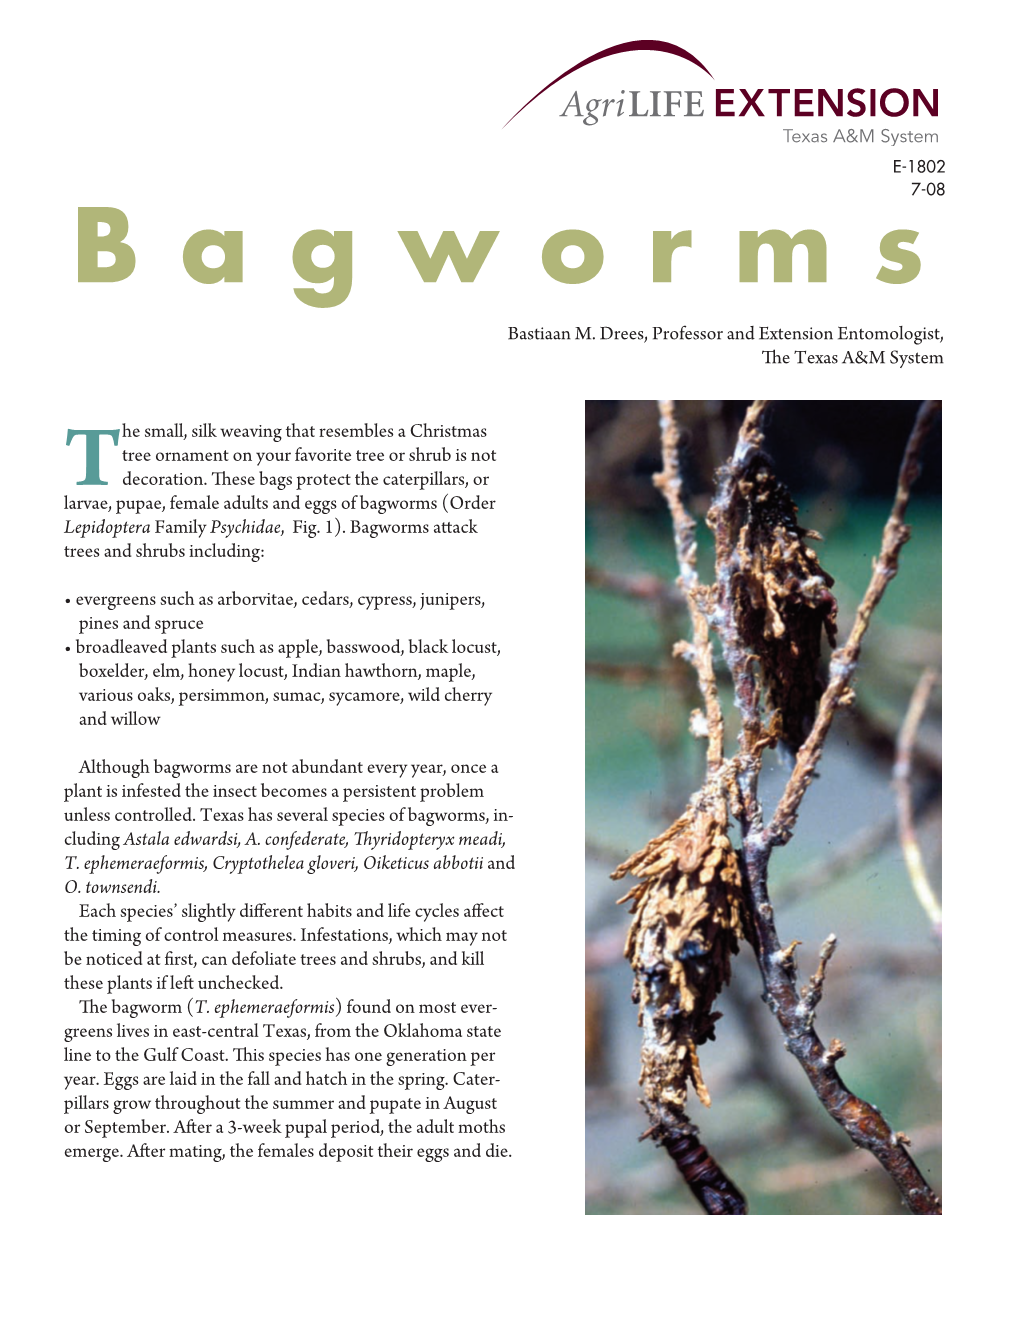 Bagworms (Order Lepidoptera Family Psychidae, Fig